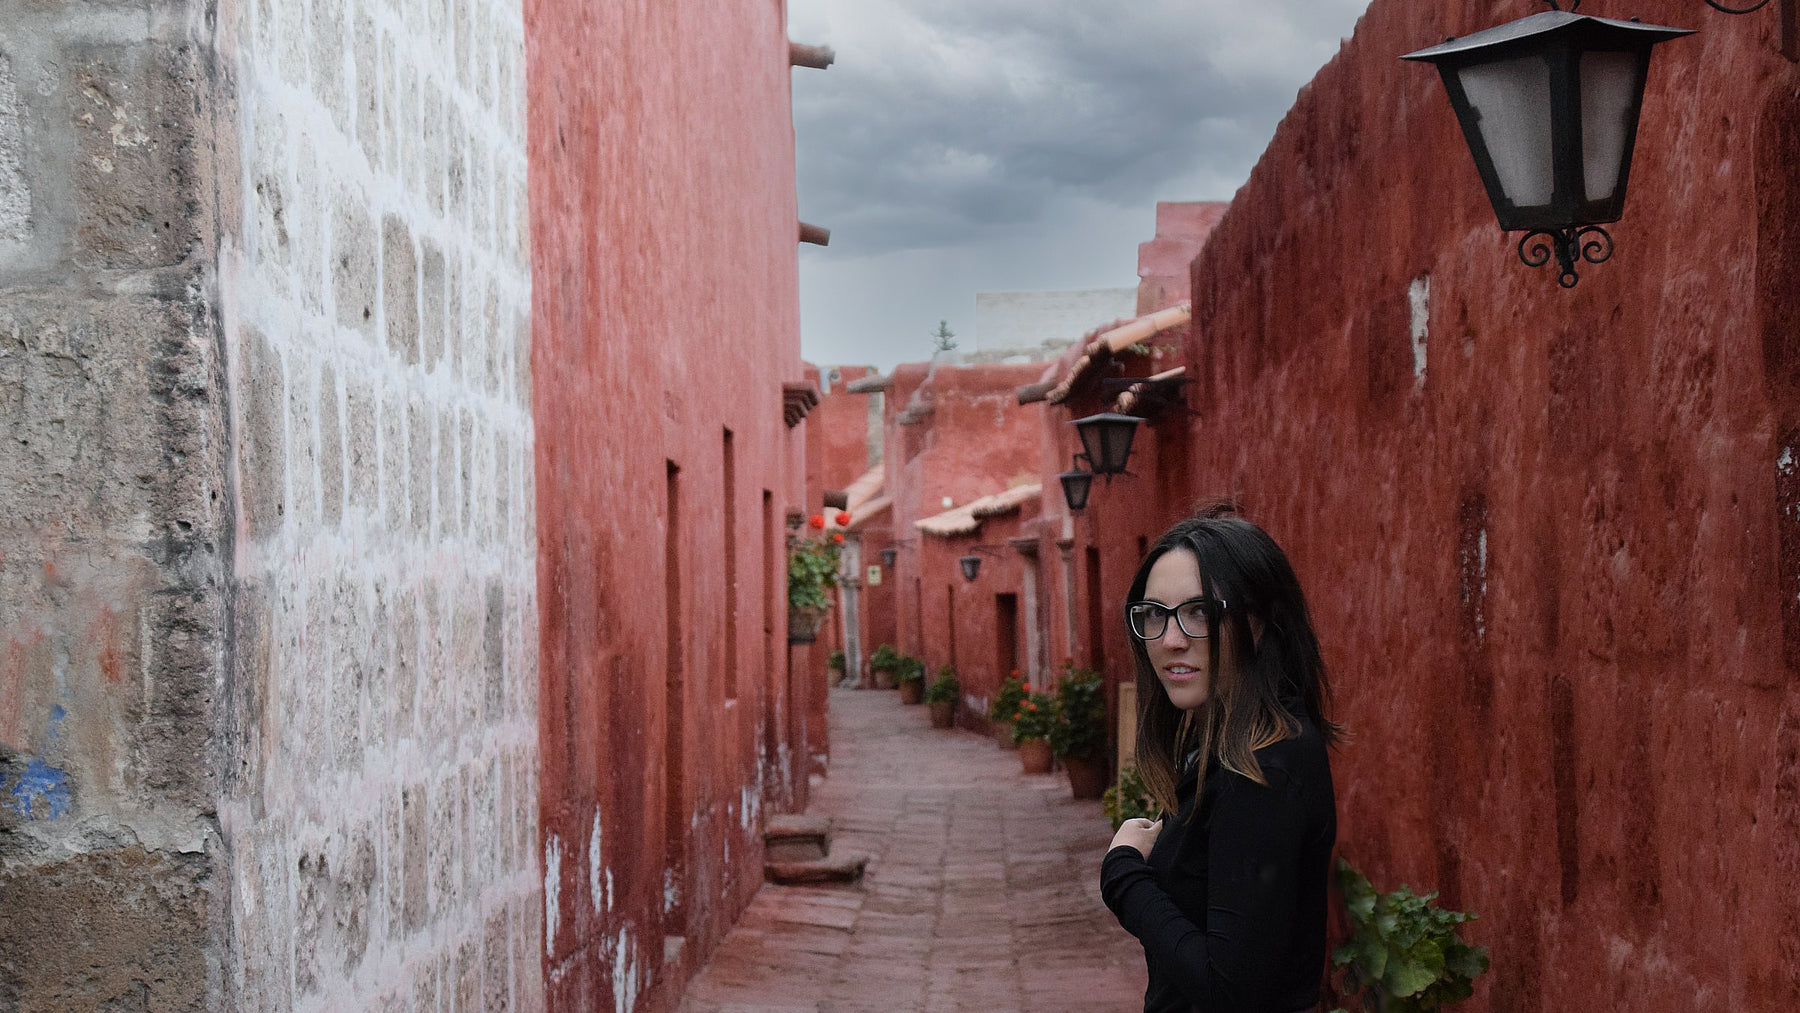 Founder of Splice Reversible Clothing Ashly Ryan looking back at the camera while walking down an alley in Arequipa, Peru